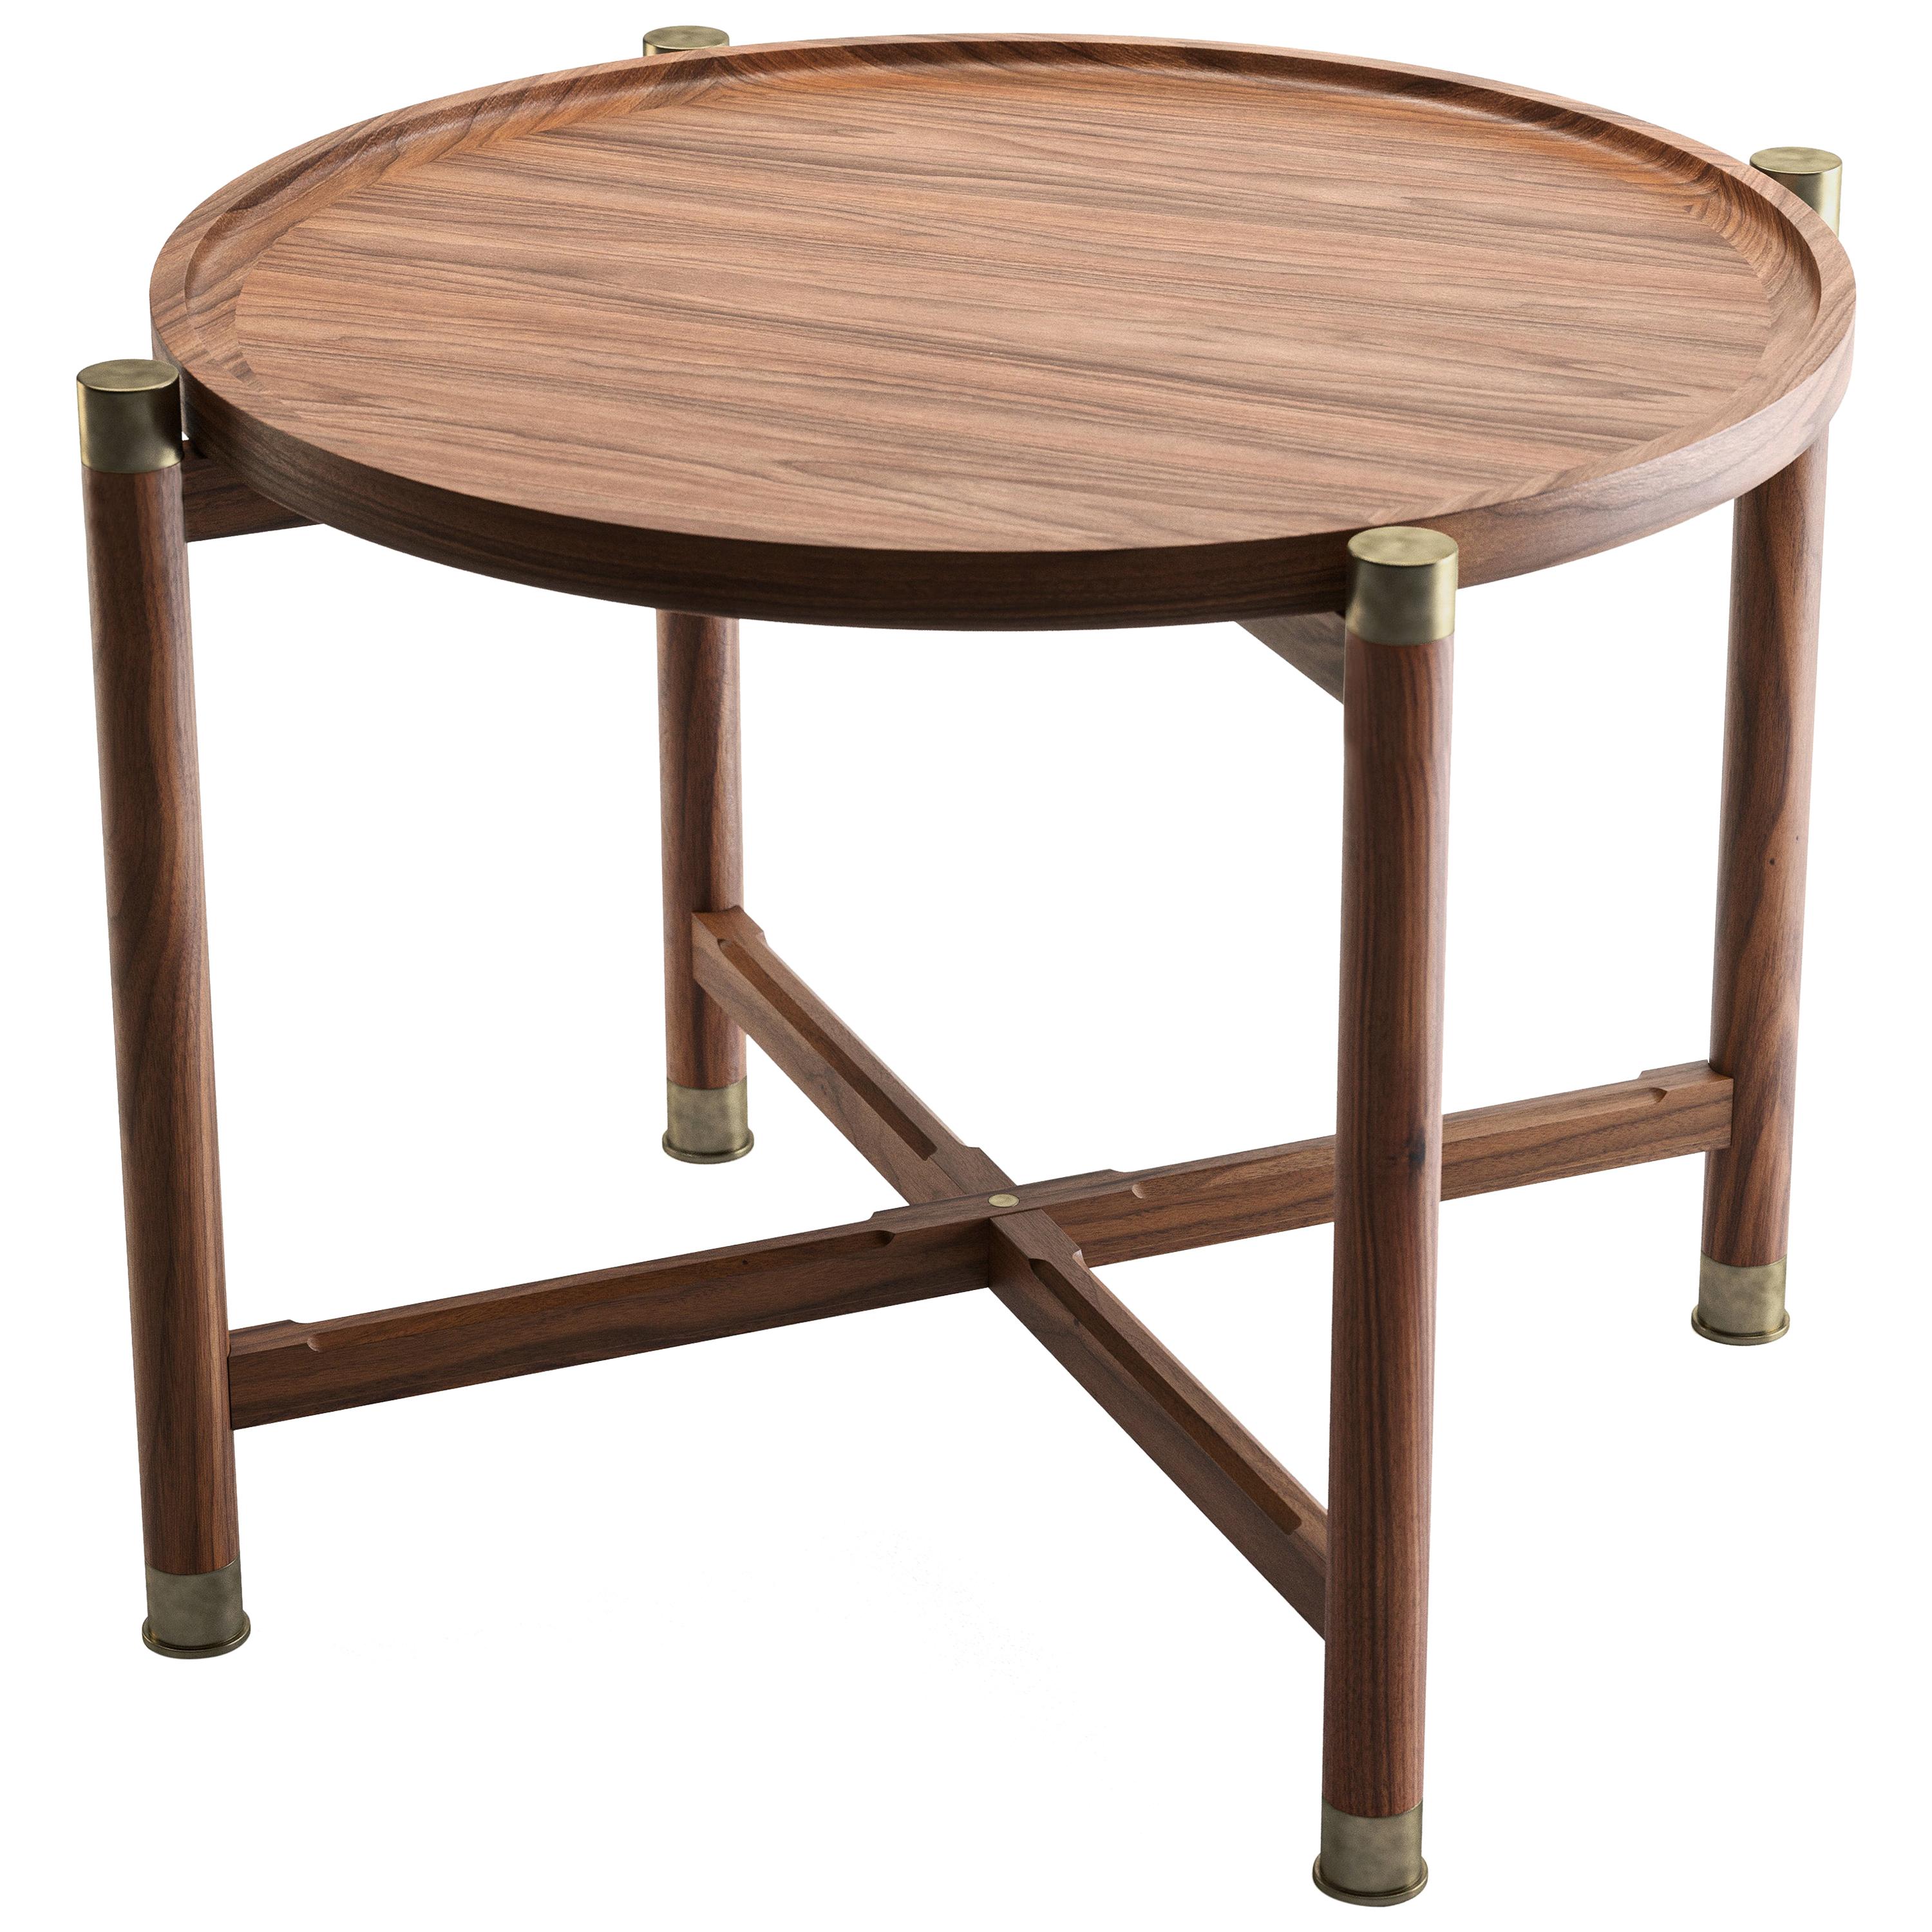 Otto Round Side Table in Light Walnut with Antique Brass Fittings For Sale